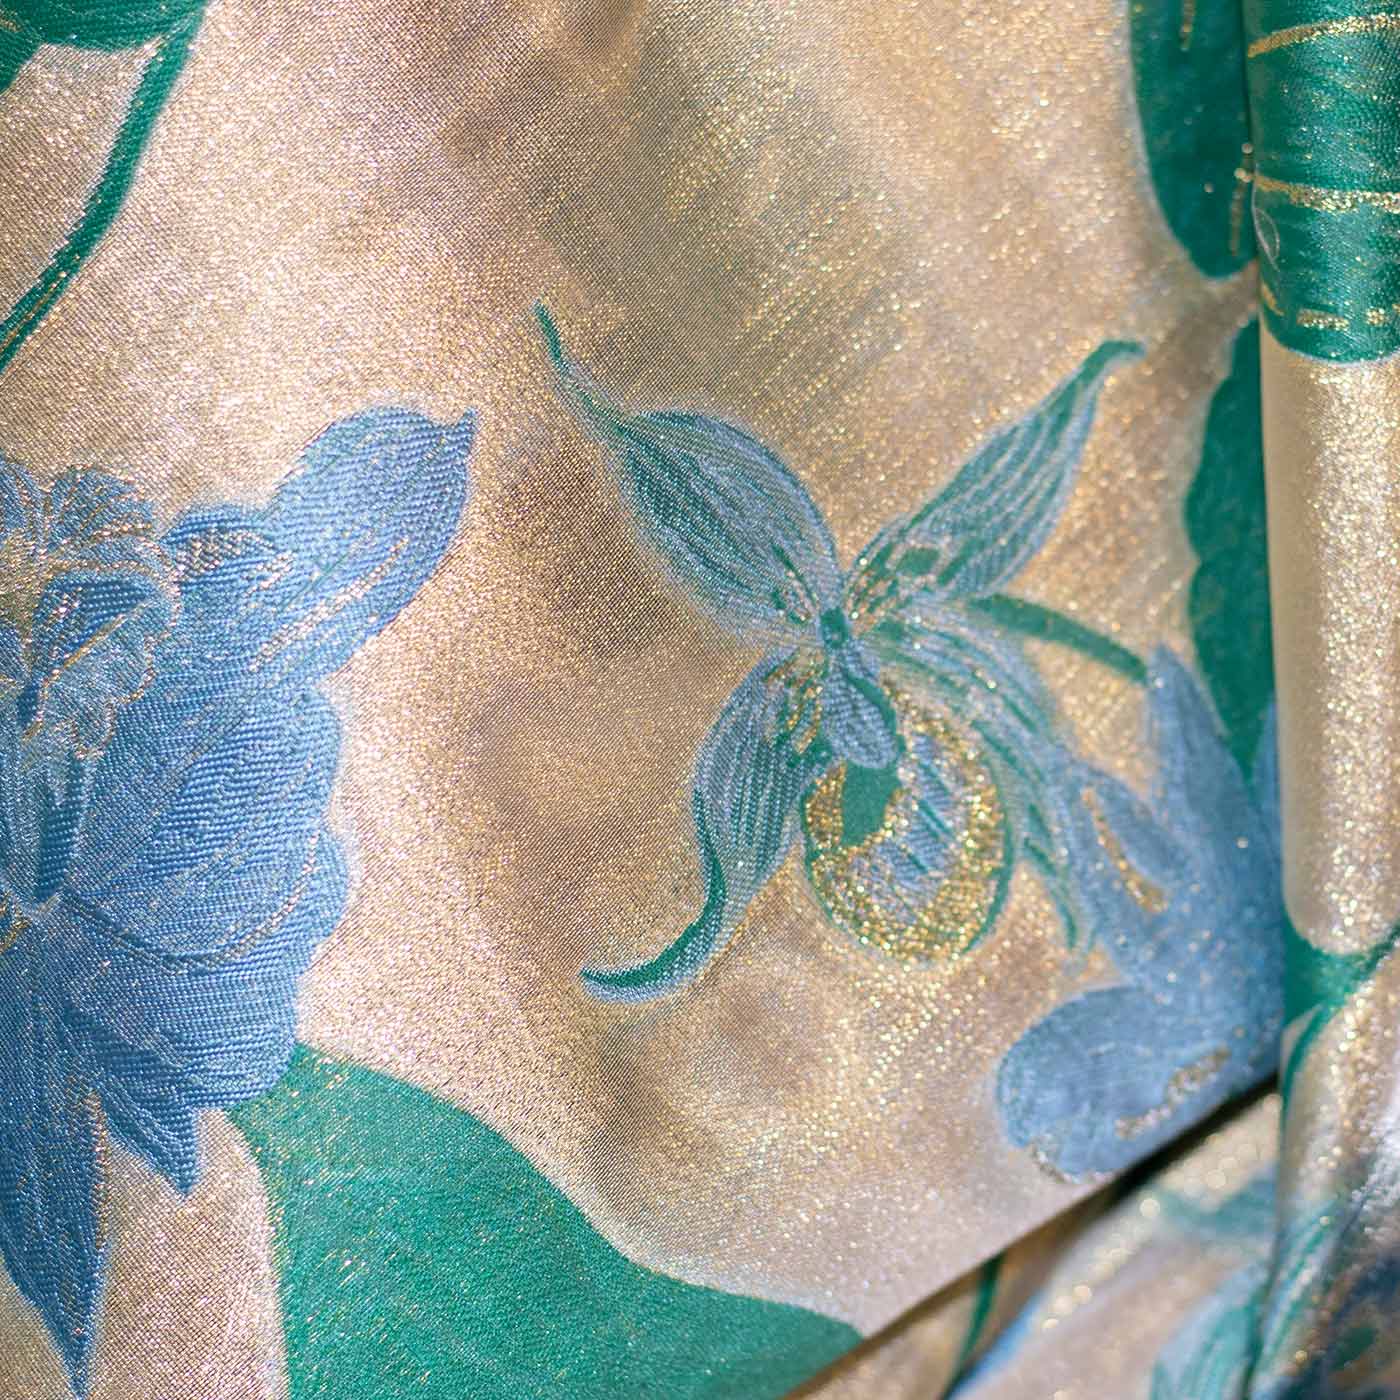 Green and Sky Blue on Gold Floral Brocade Fabric